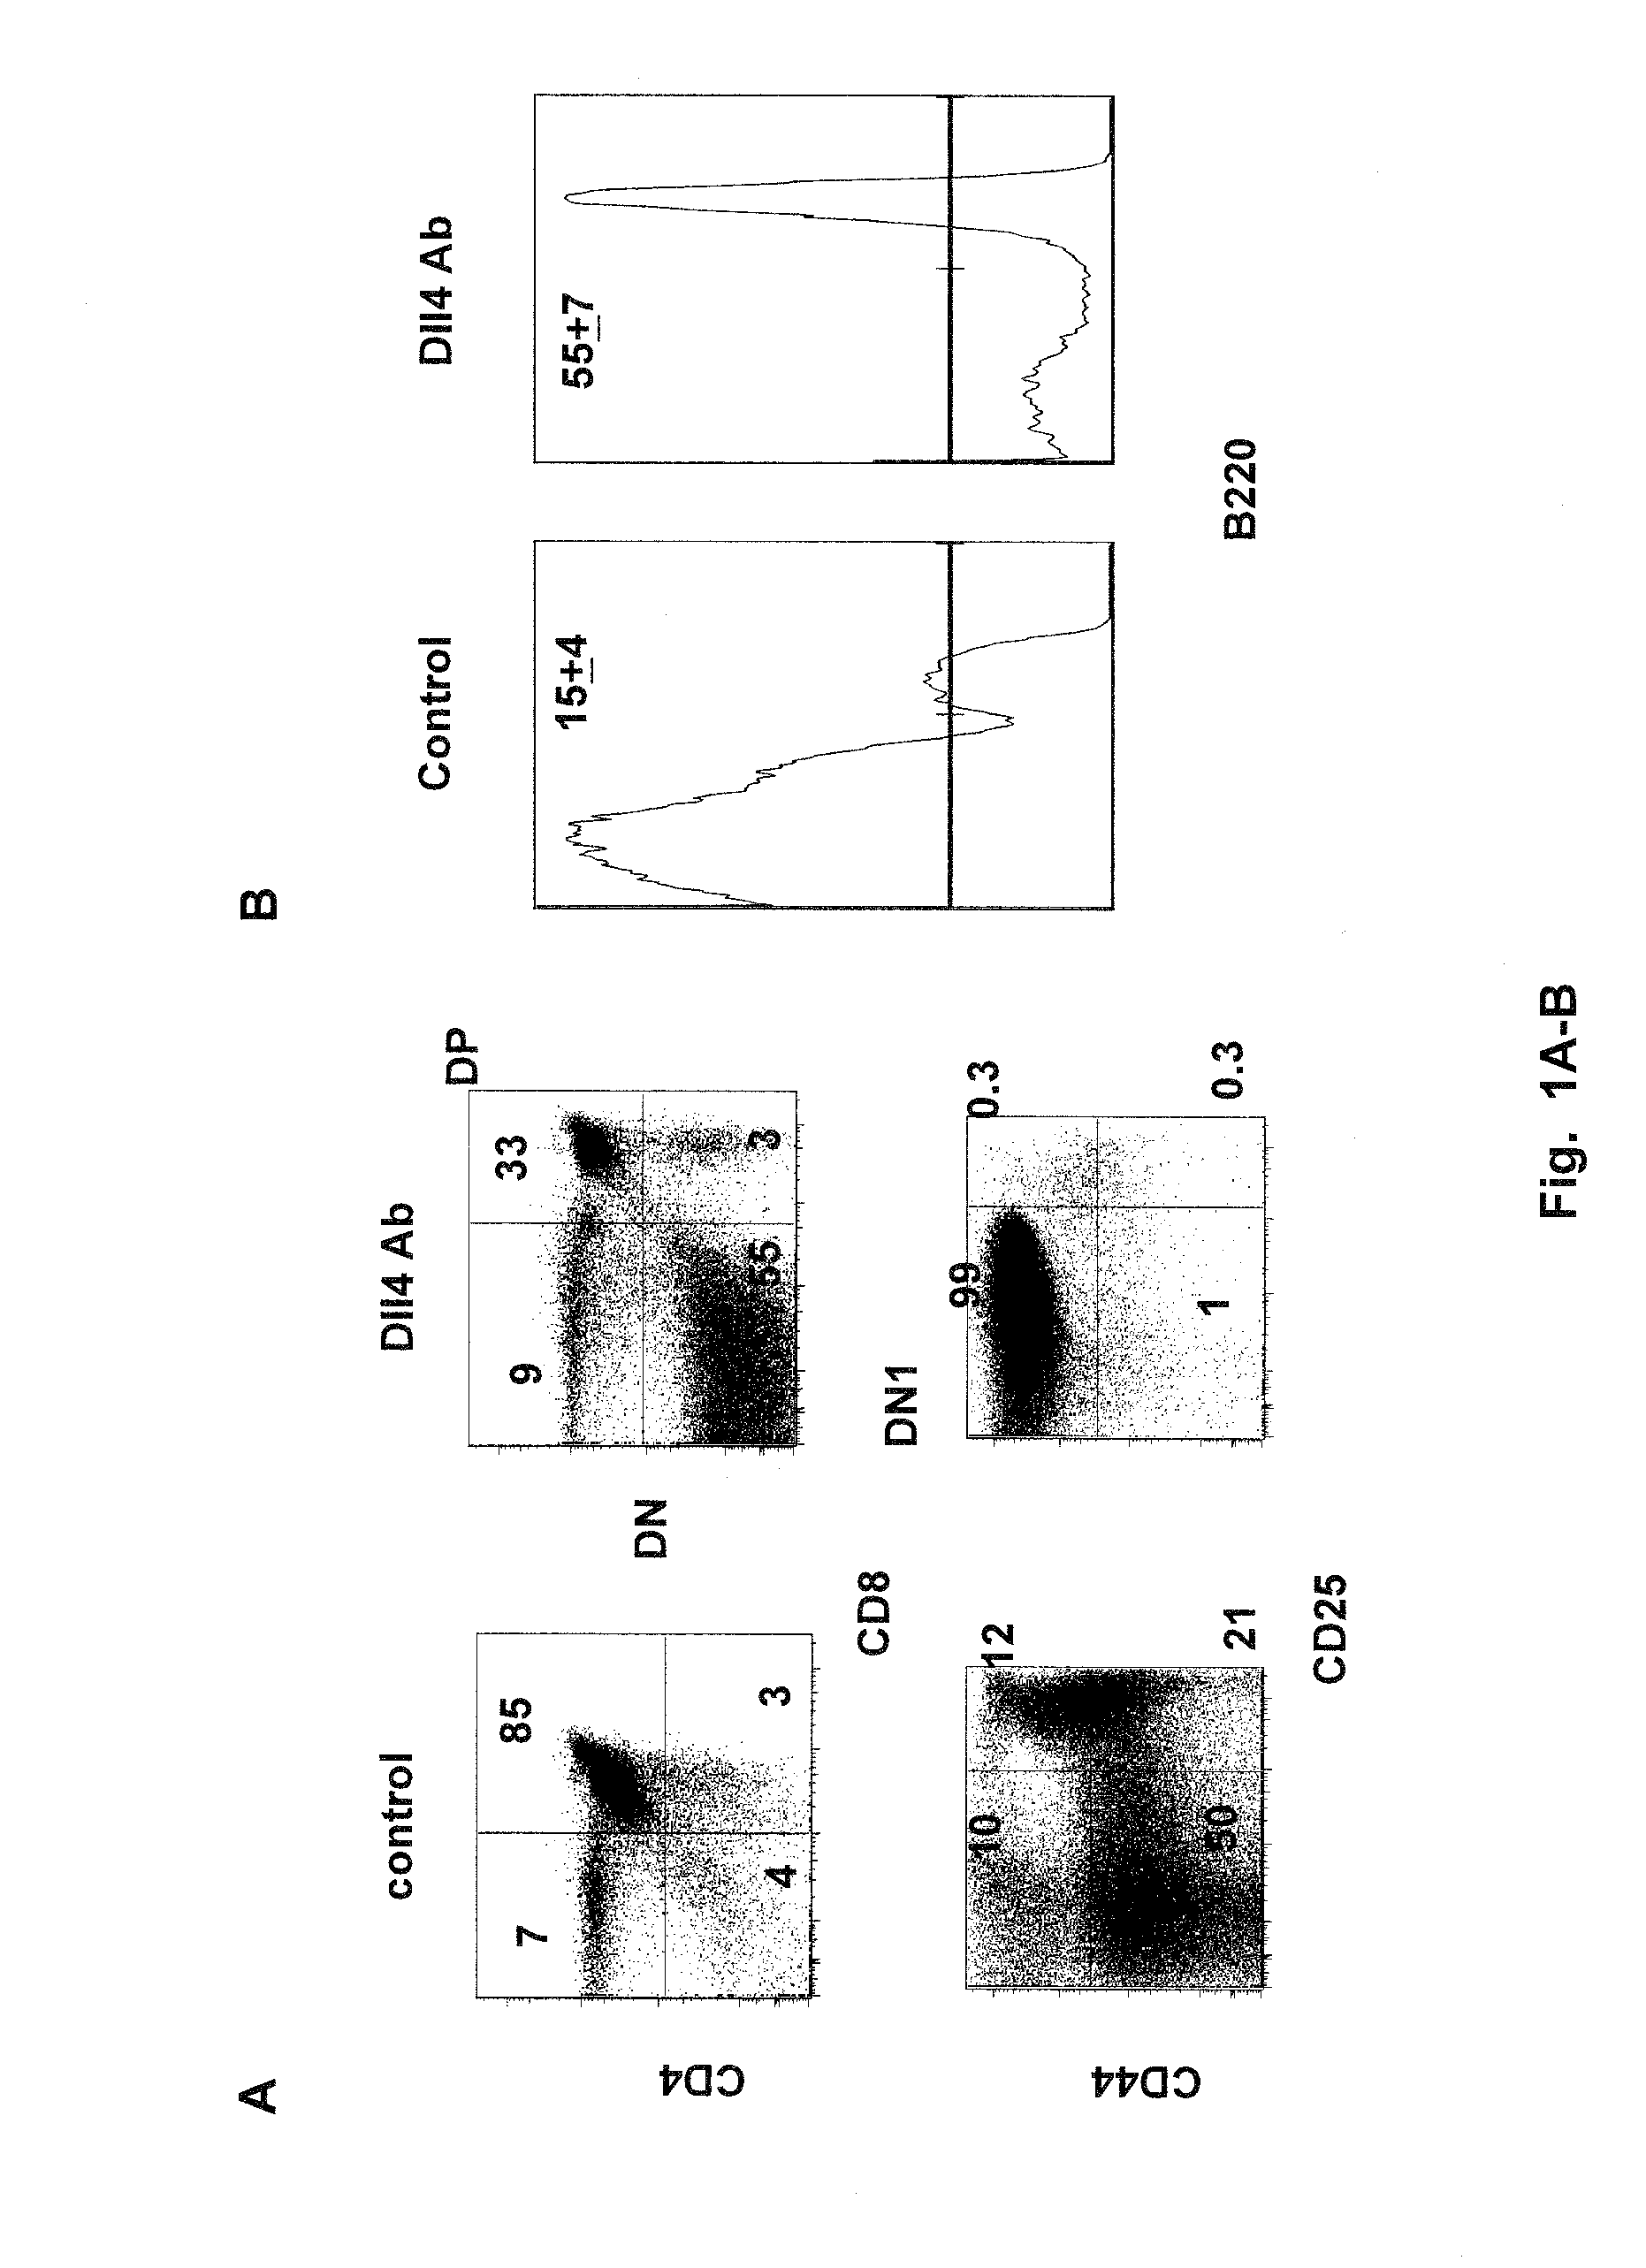 Methods of treating diseases with dll4 antagonists